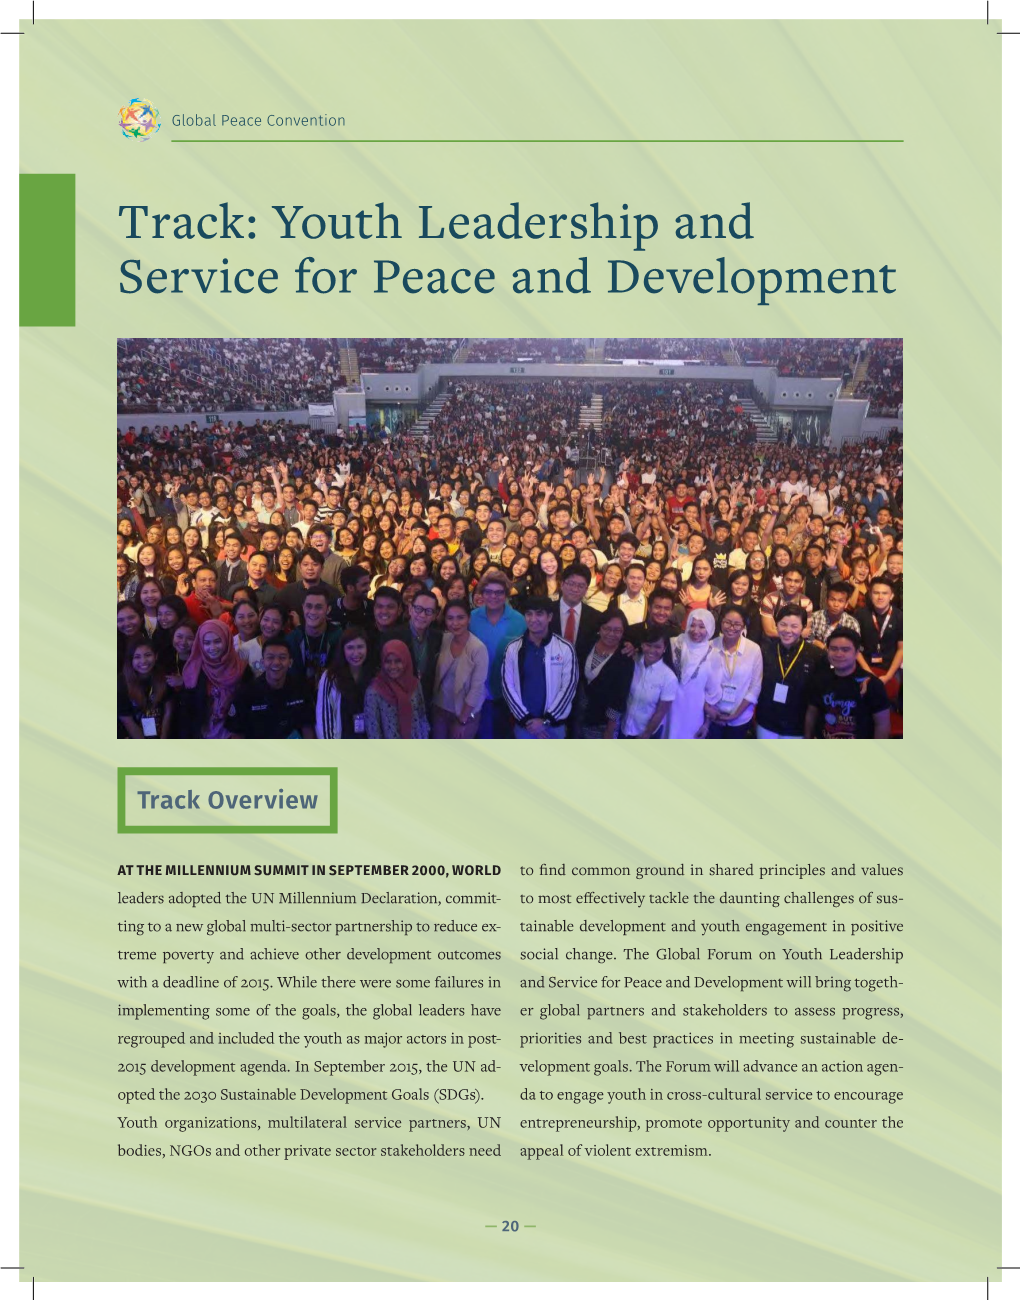 Track: Youth Leadership and Service for Peace and Development